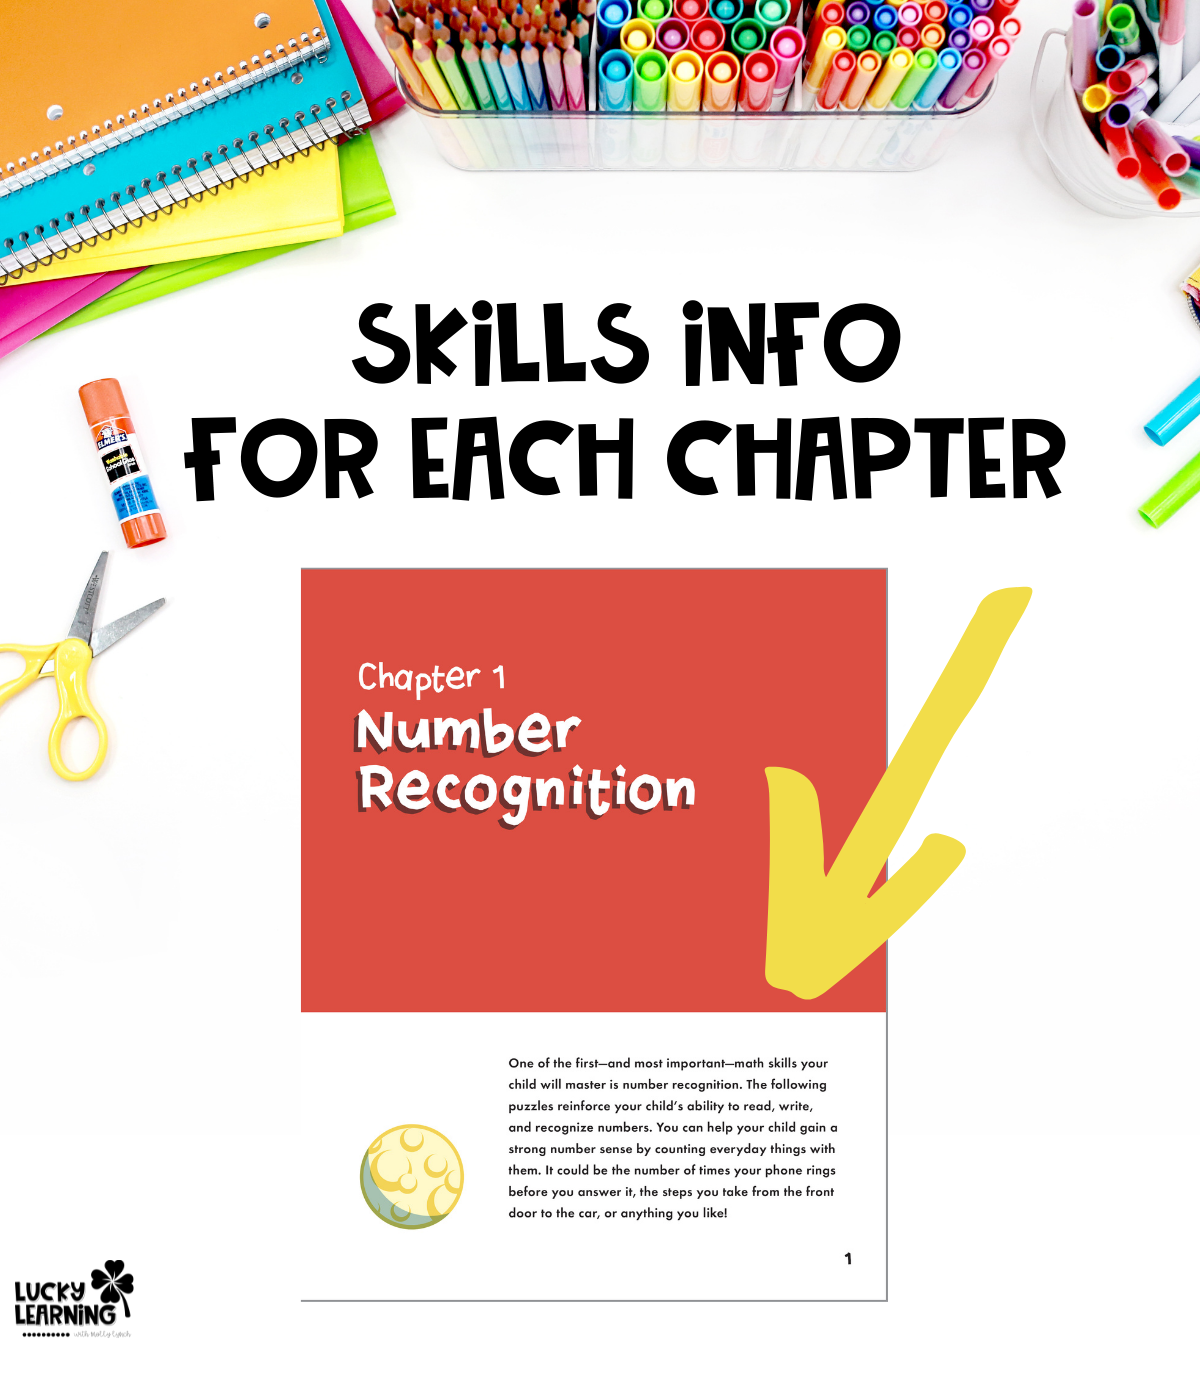 skill info for each chapter of the math puzzles book | Lucky Learning with Molly Lynch